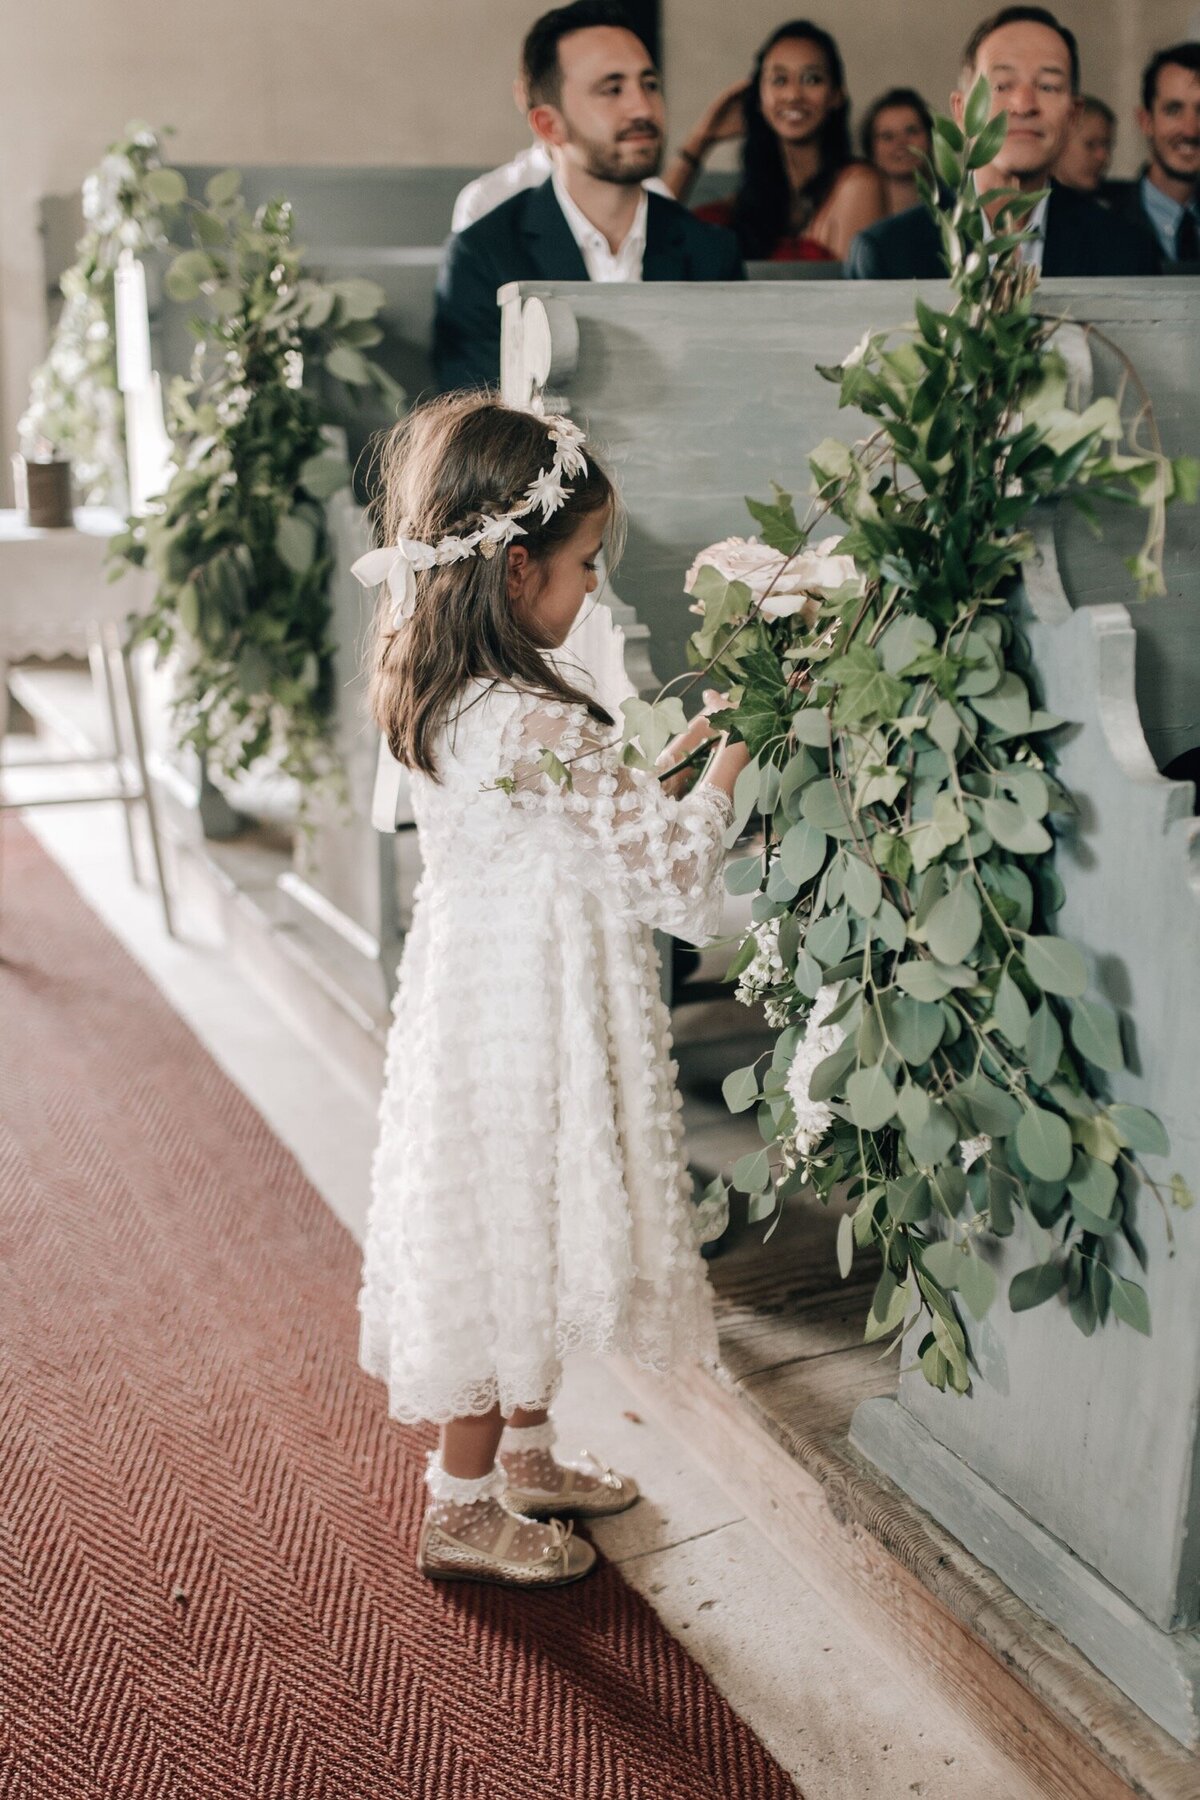 042_Flora_And_Grace_Europe_Destination_Wedding_Photographer-163_Elegant and whimsical destination wedding in Europe captured by editorial wedding photographer Flora and Grace.